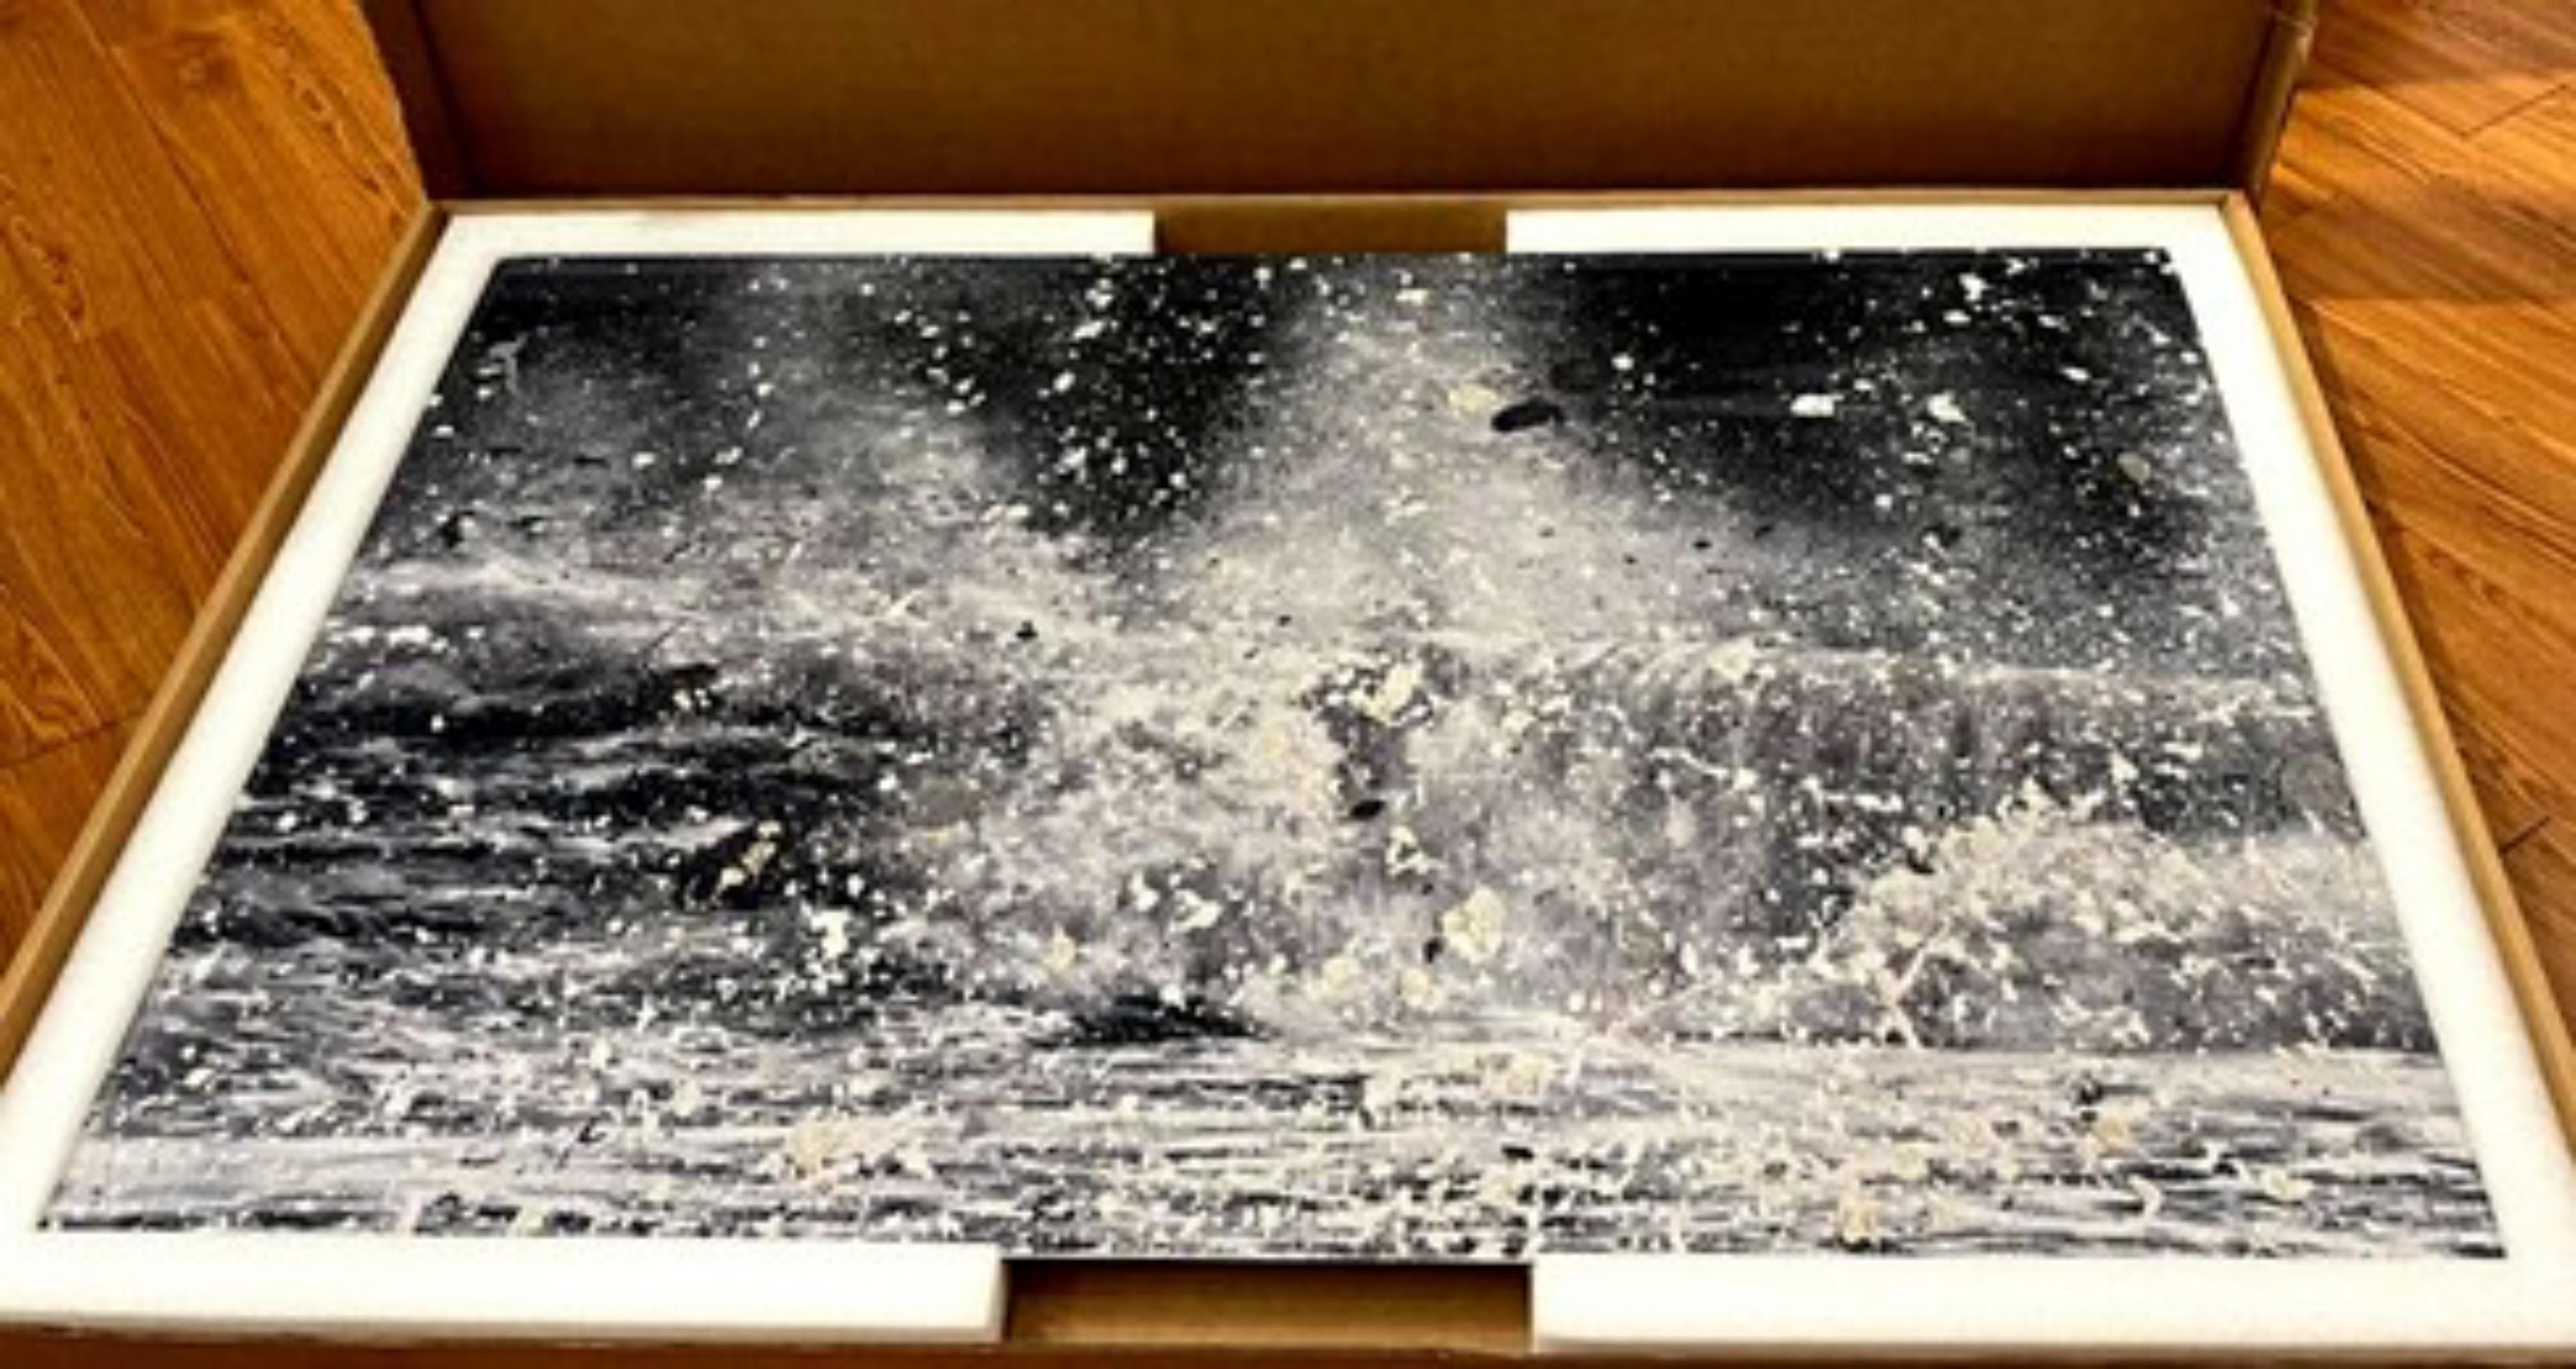 Blizzard (H13-10), from Where the Land Meets the Sea - Lt Ed hand signed - NEW - Pop Art Print by Damien Hirst